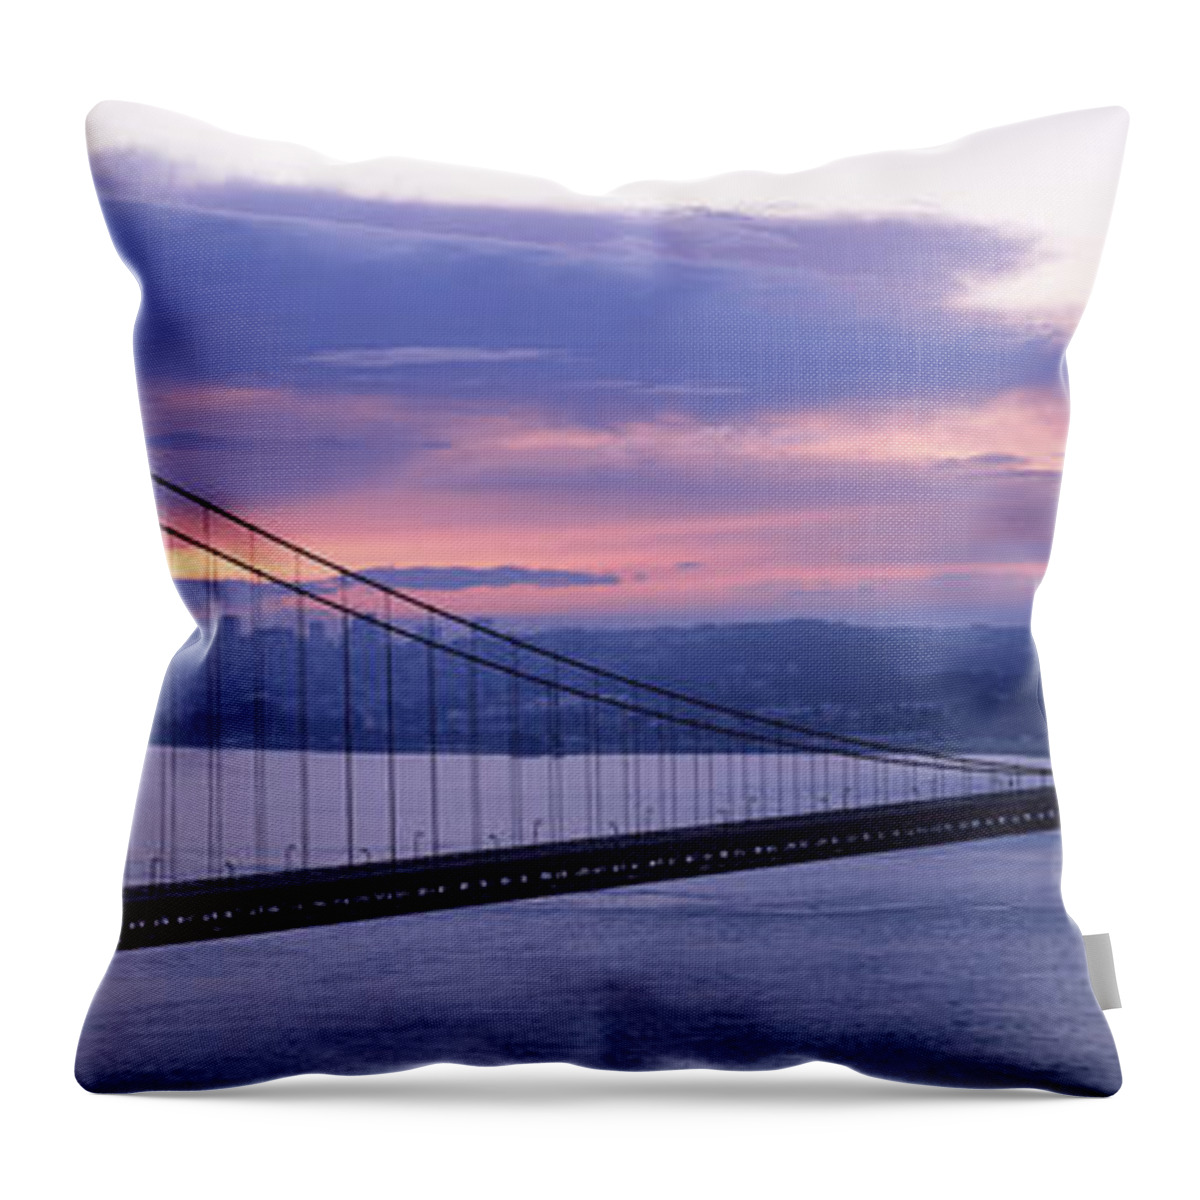 Photography Throw Pillow featuring the photograph Silhouette Of A Suspension Bridge by Panoramic Images